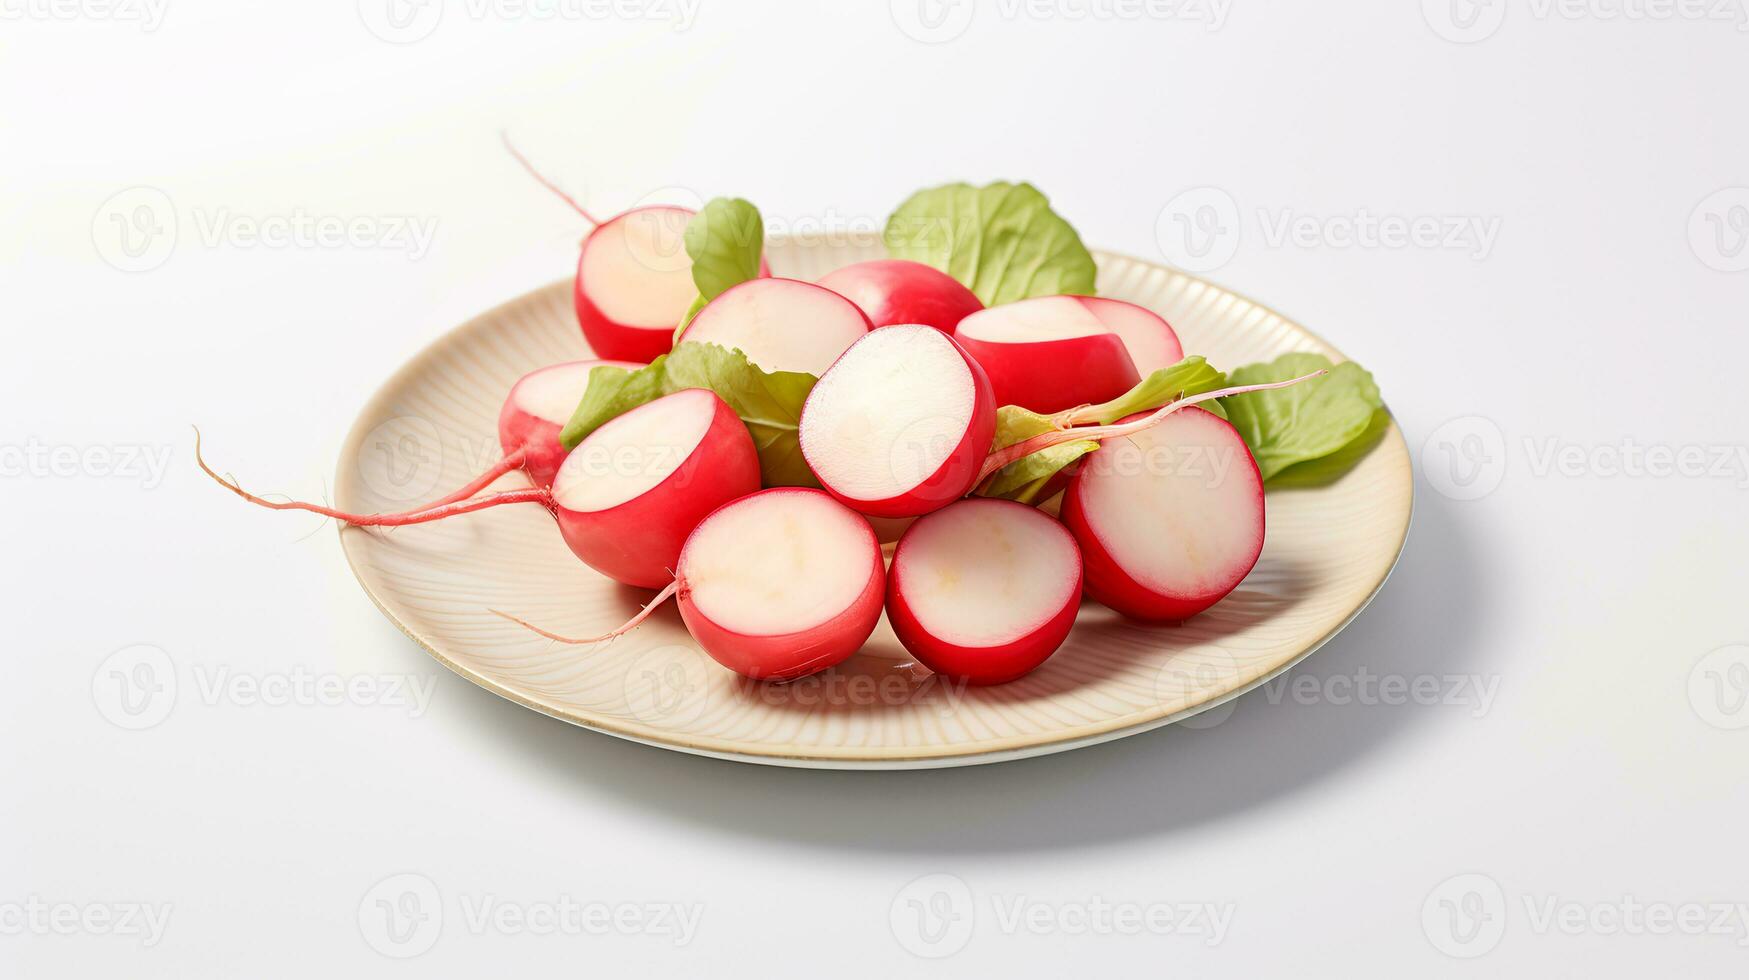 Photo of Rutabaga sliced pieces on minimalist plate isolated on white background